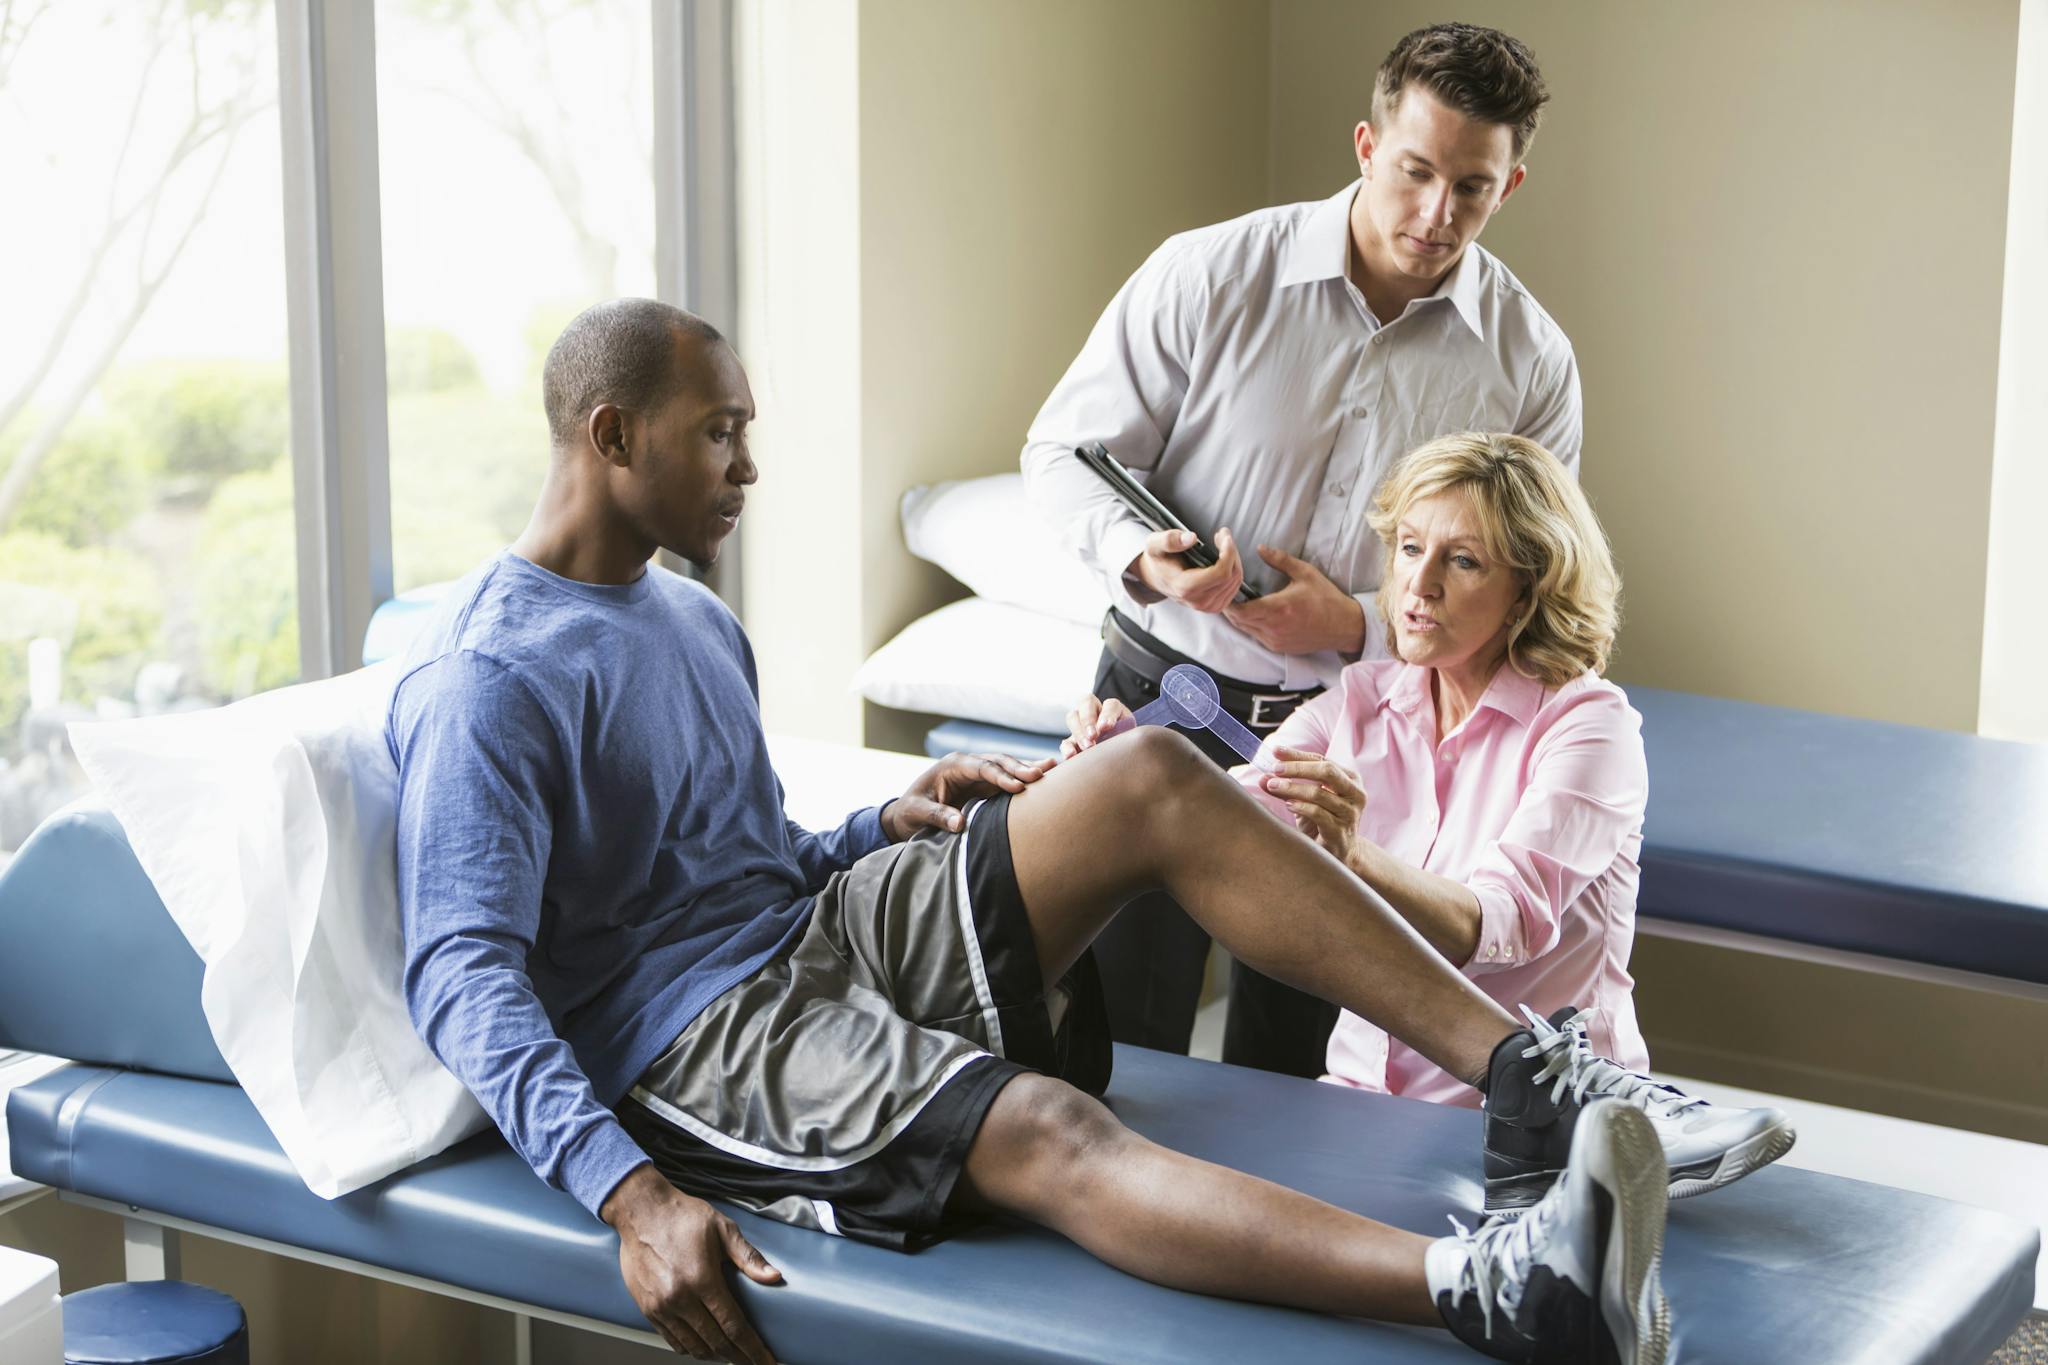 How to Prevent Knee Injury While Exercising